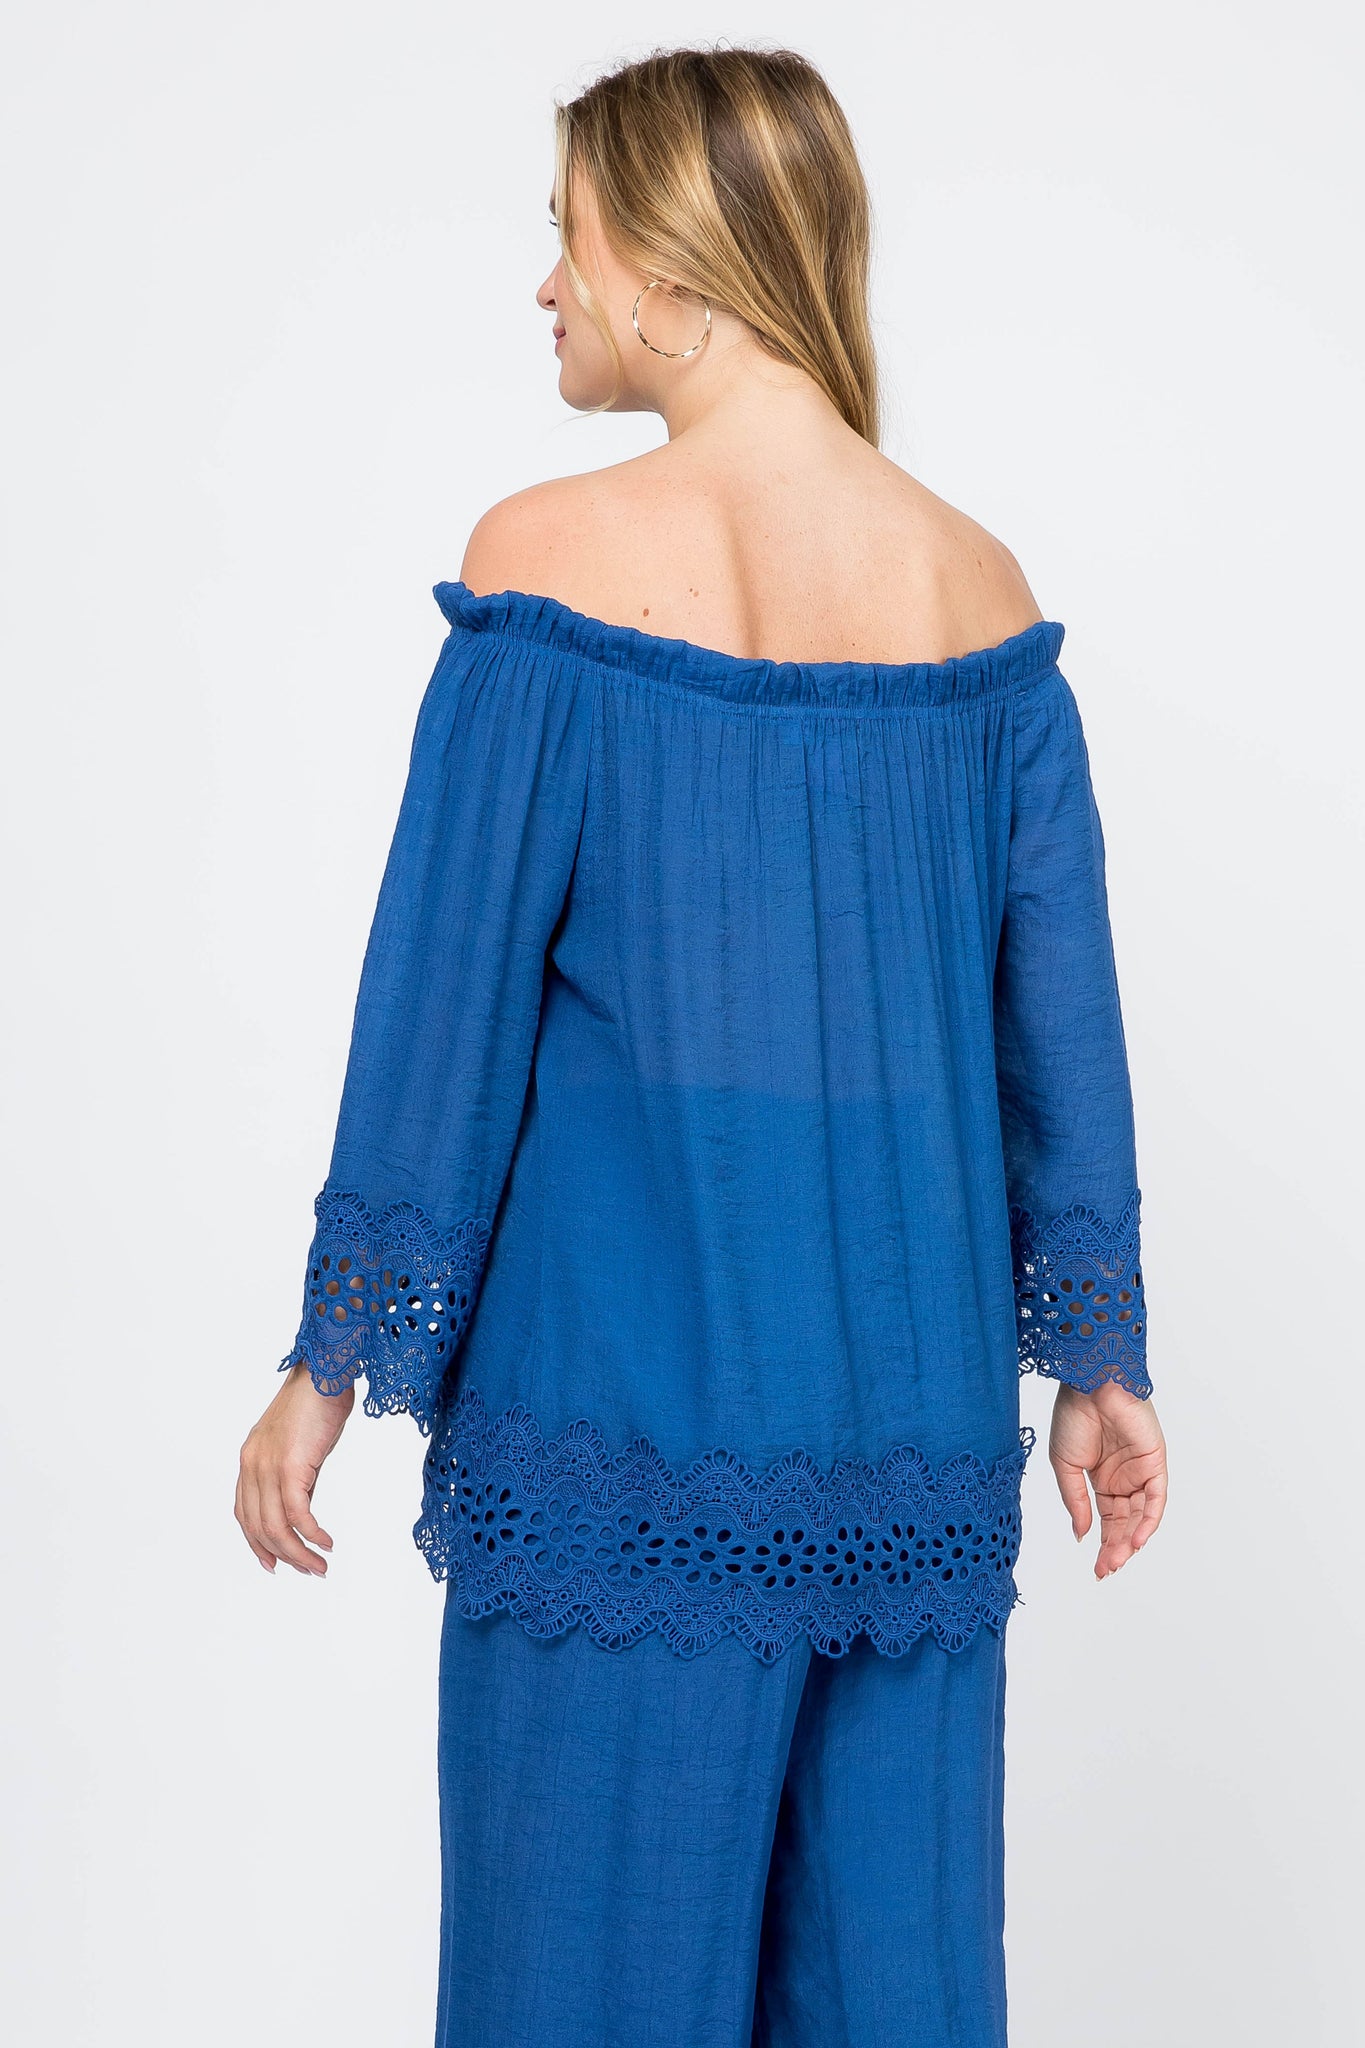 Women's Casual Off-Shoulder Crochet Trimmed Hem and Sleeve Tunic Top - Mojito Collection - Vacation Clothing, Women's Clothing, Women's Resort Wear, Women's Top